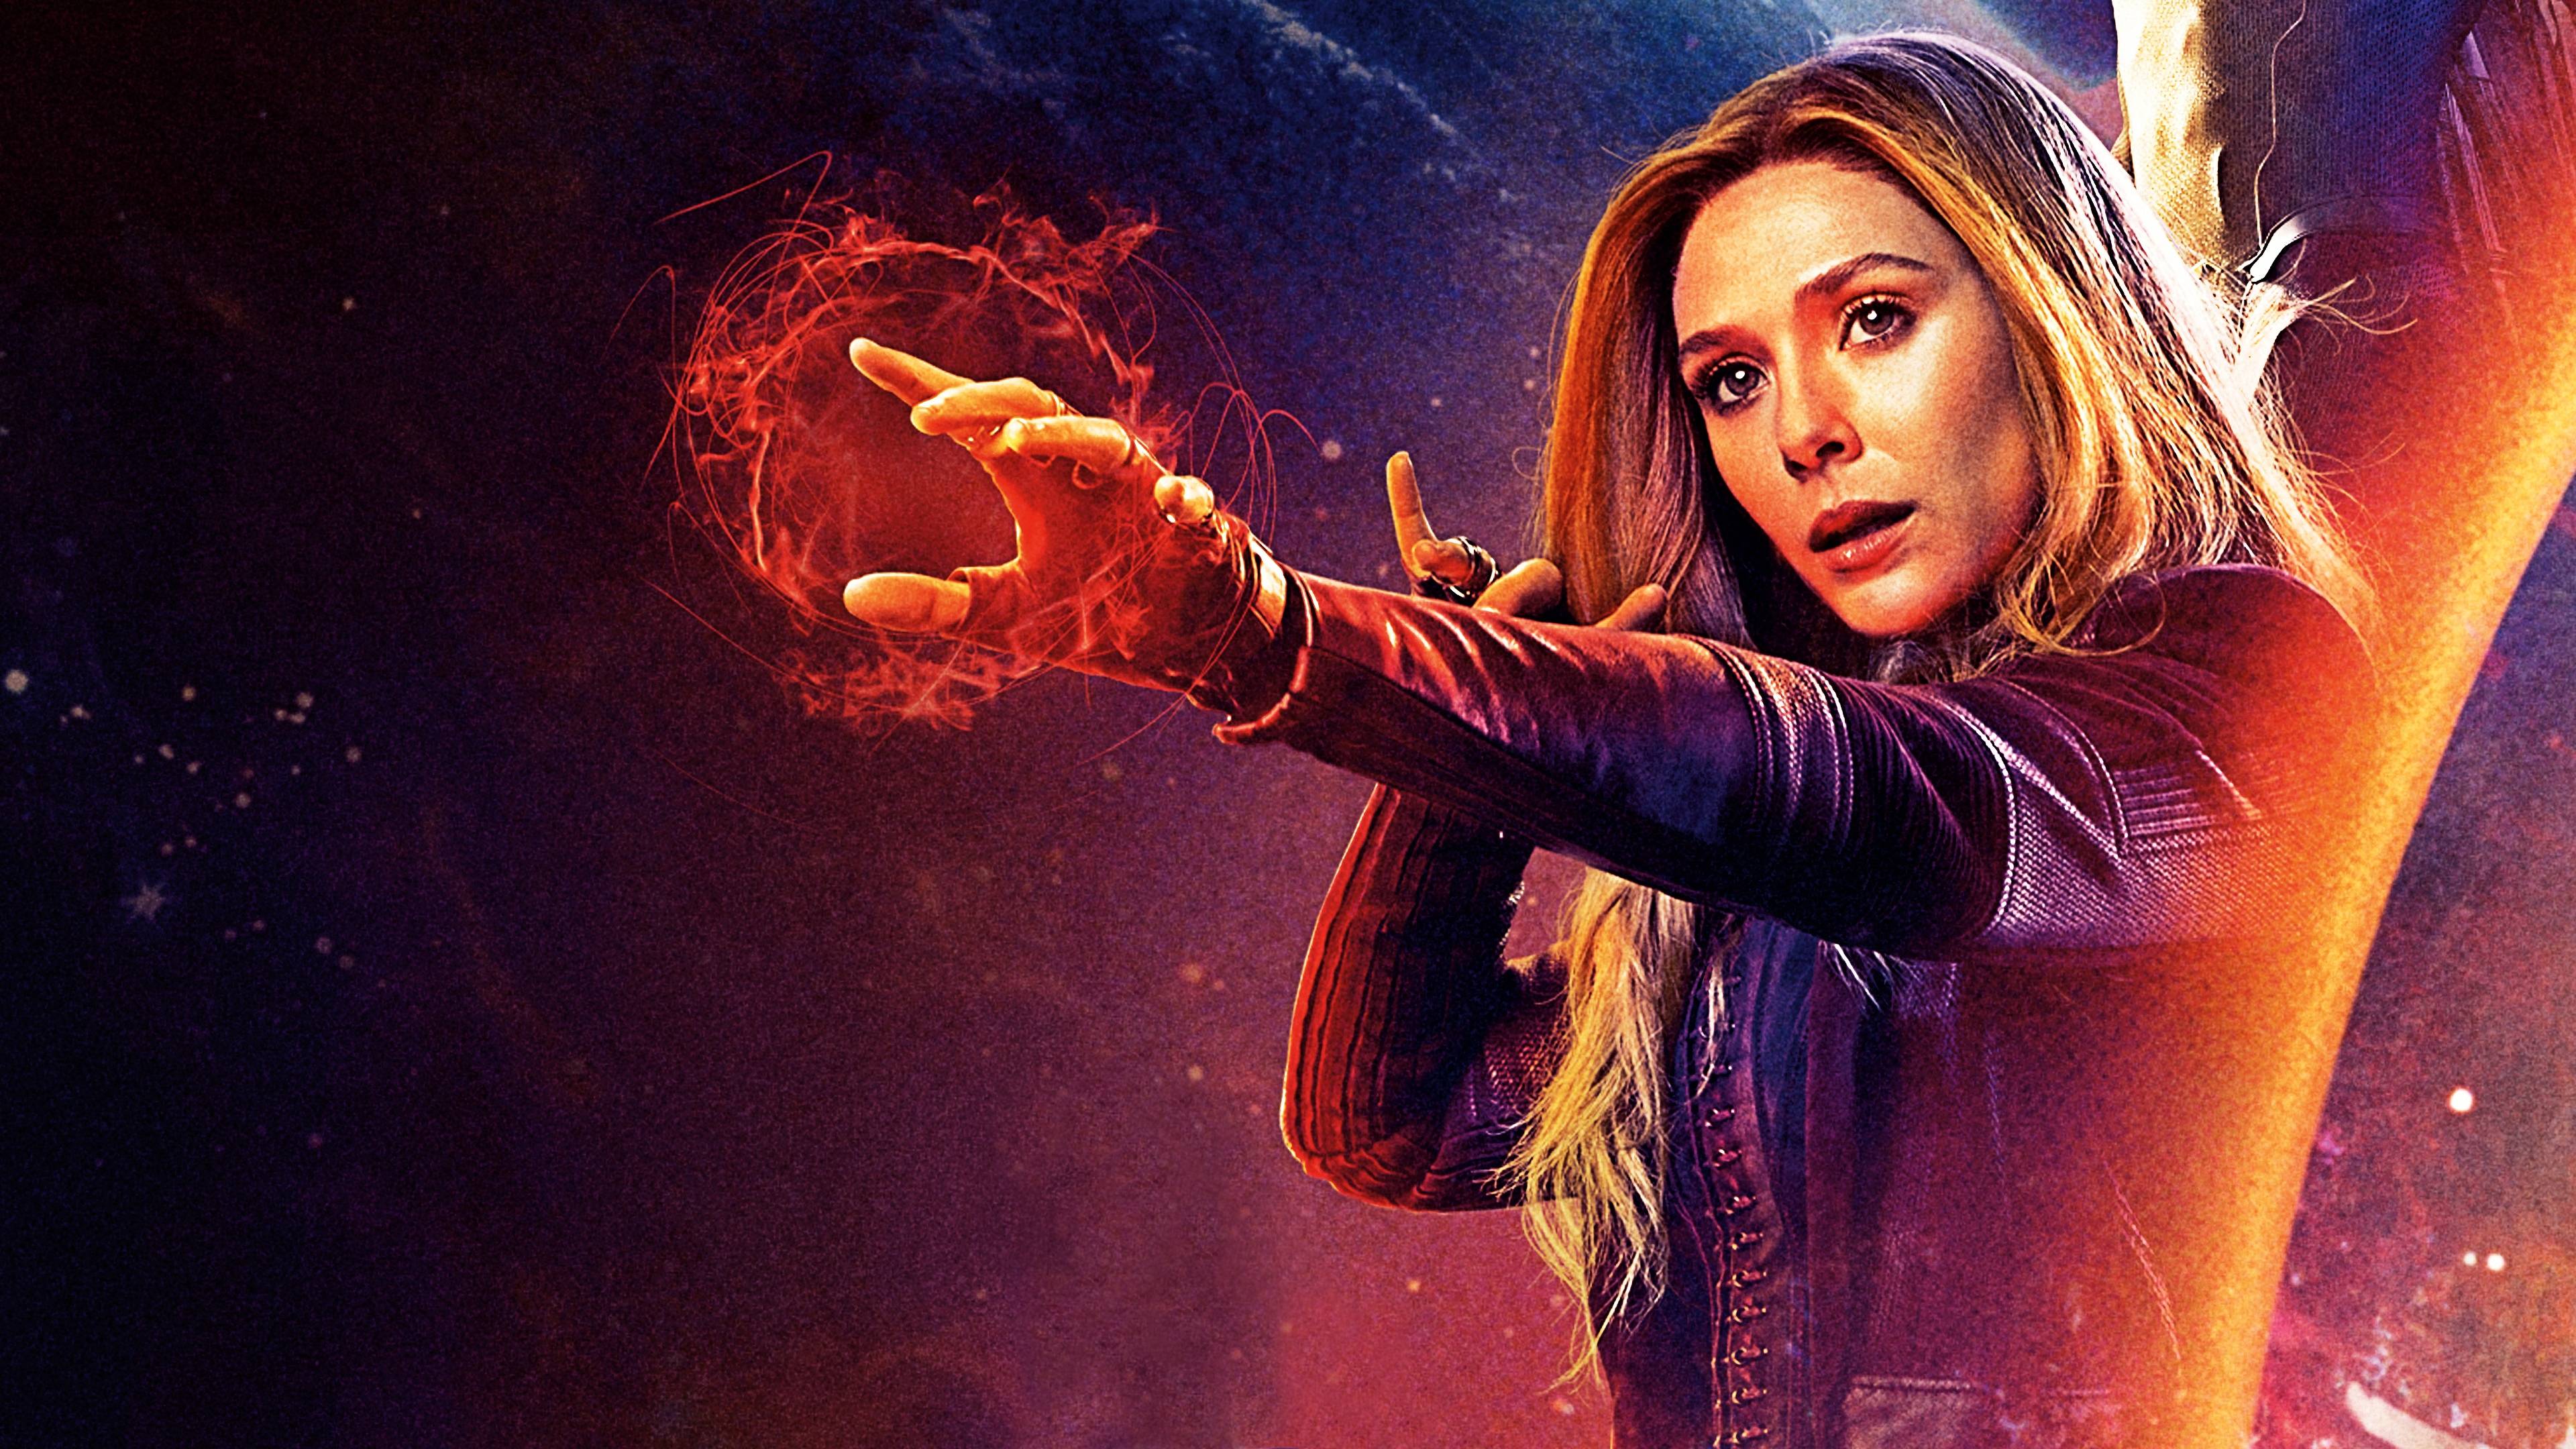 HD desktop wallpaper: Tv Show, Zombie, Scarlet Witch, Wanda Maximoff, What  If ? download free picture #1040332